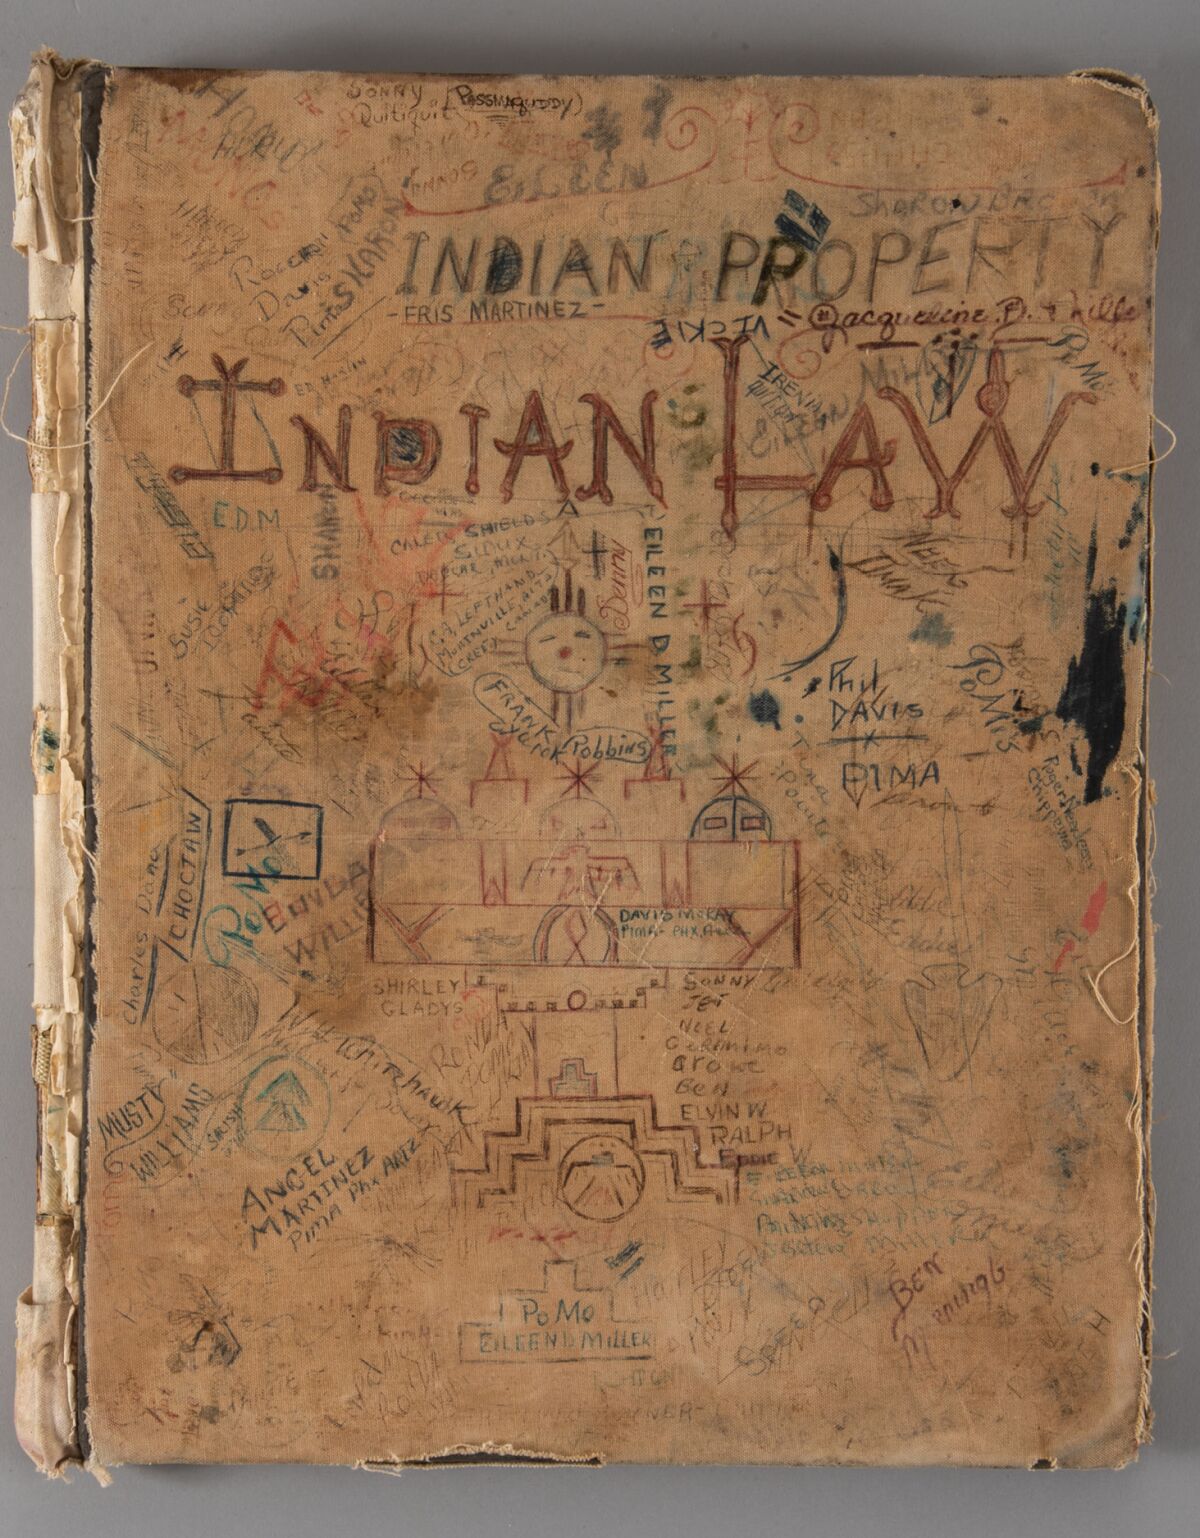 The cover of the Alcatraz Log Book features names and drawings and the words "INDIAN LAW" in capital letters in red ink.